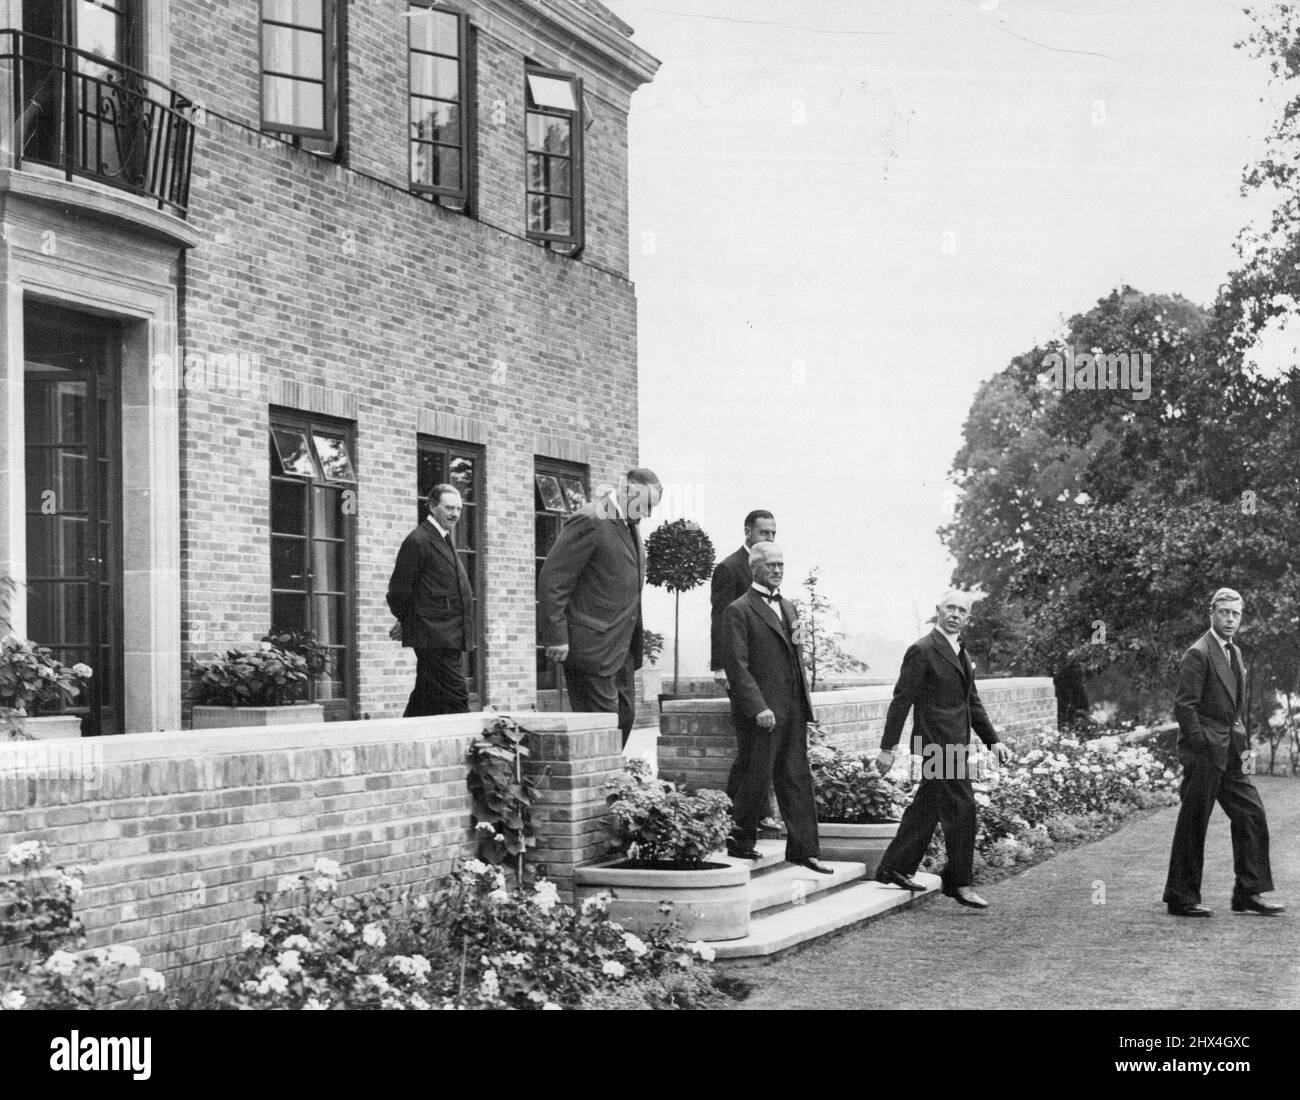 The King At The King's House. His Majesty Paid His First Visit to the King's House, the Royal Warrant Holders, Silver Jubilee Gift to King George V. Walton - On- Thames, Surrey, On a Beautiful woodland site Presented by Lord Iveagh.  4. H.M. The King leaving after the inspection of the house with members of the Committer. July 07, 1936. Stock Photo